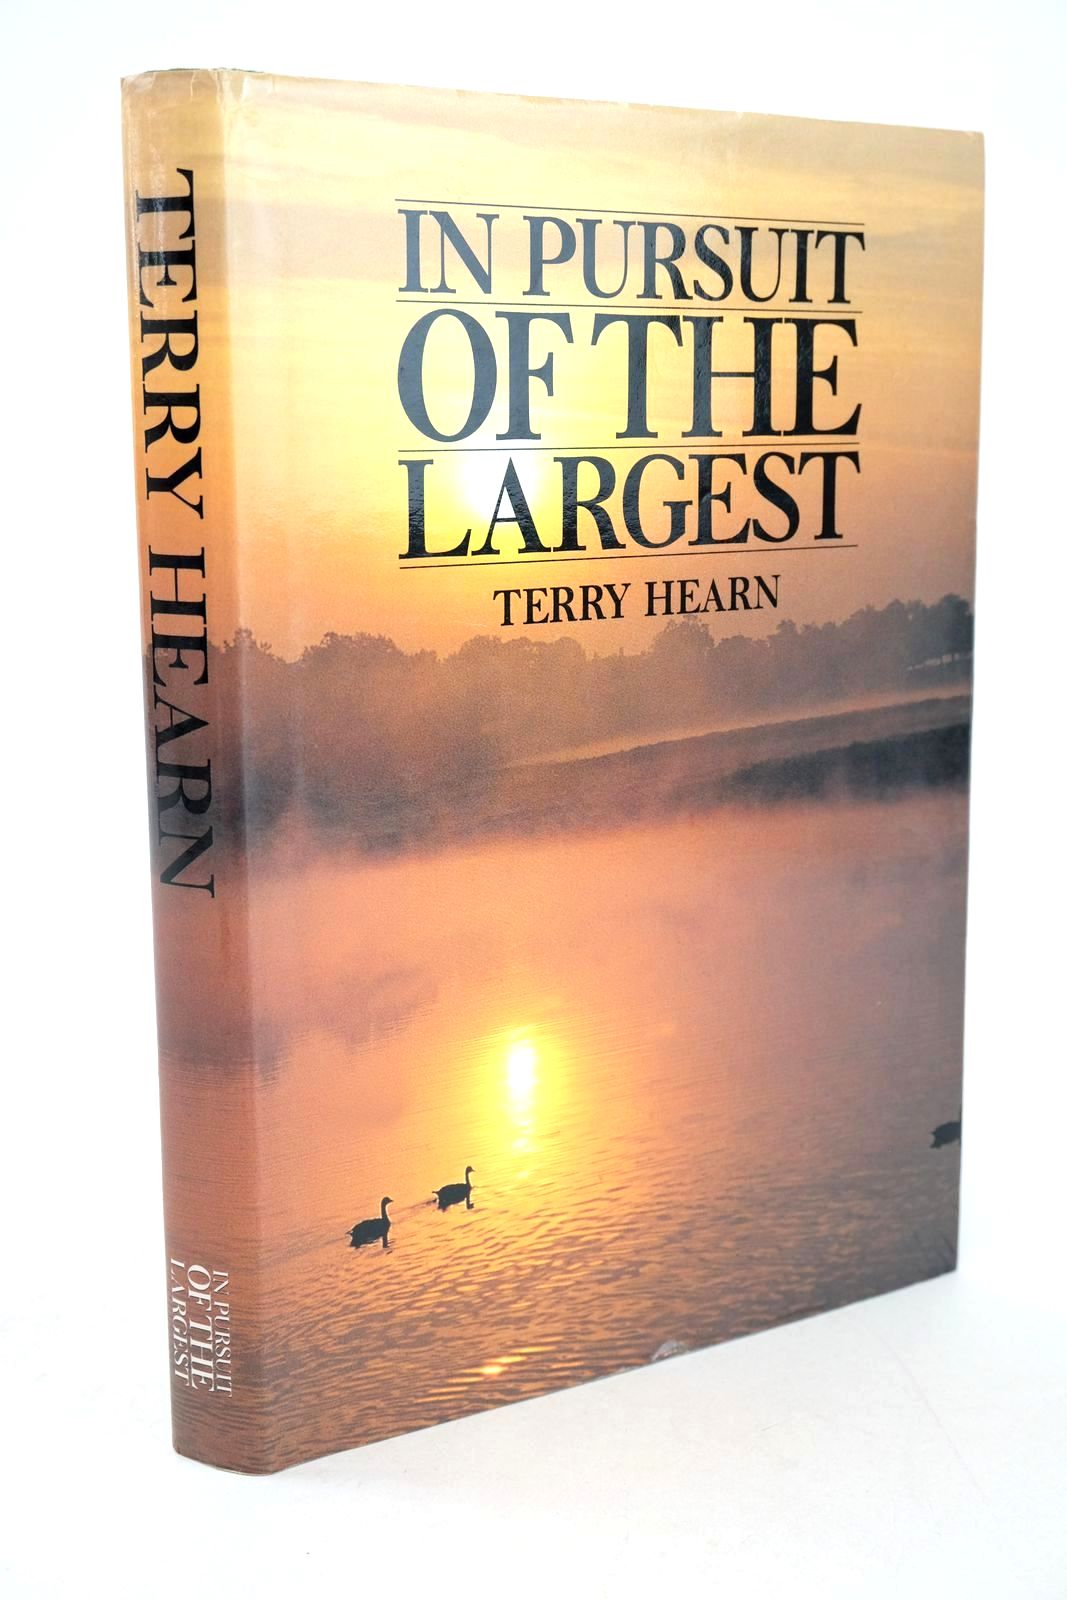 Photo of IN PURSUIT OF THE LARGEST written by Hearn, Terry published by Bountyhunter Publications (STOCK CODE: 1327669)  for sale by Stella & Rose's Books